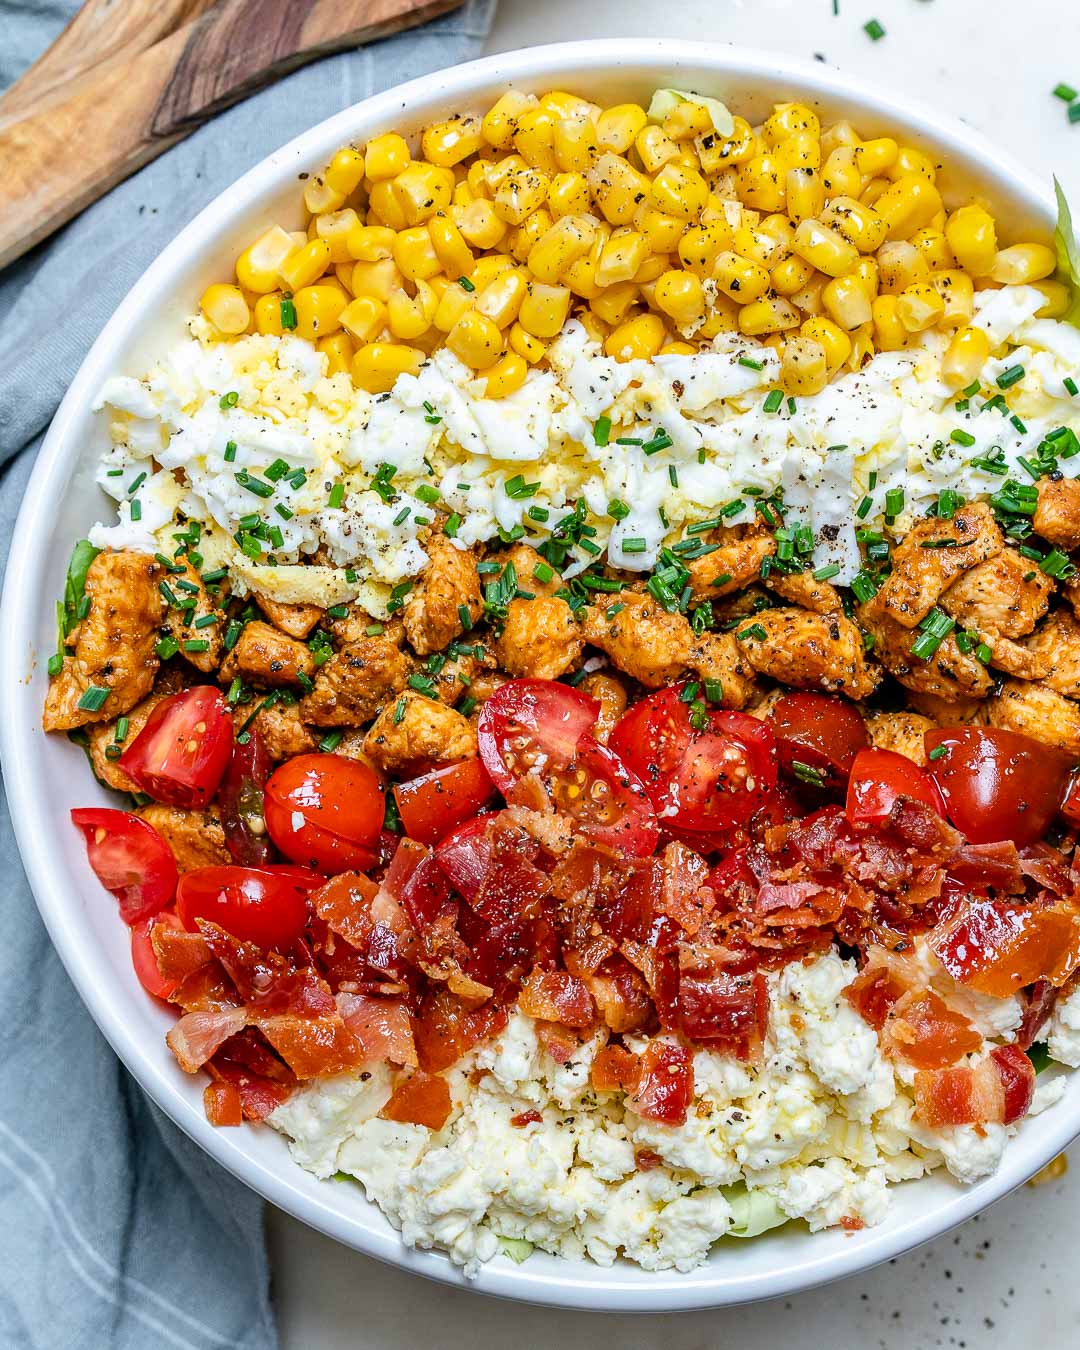 Enjoy this Healthy Chicken Cobb Salad with Extra Flavor! | Clean Food Crush